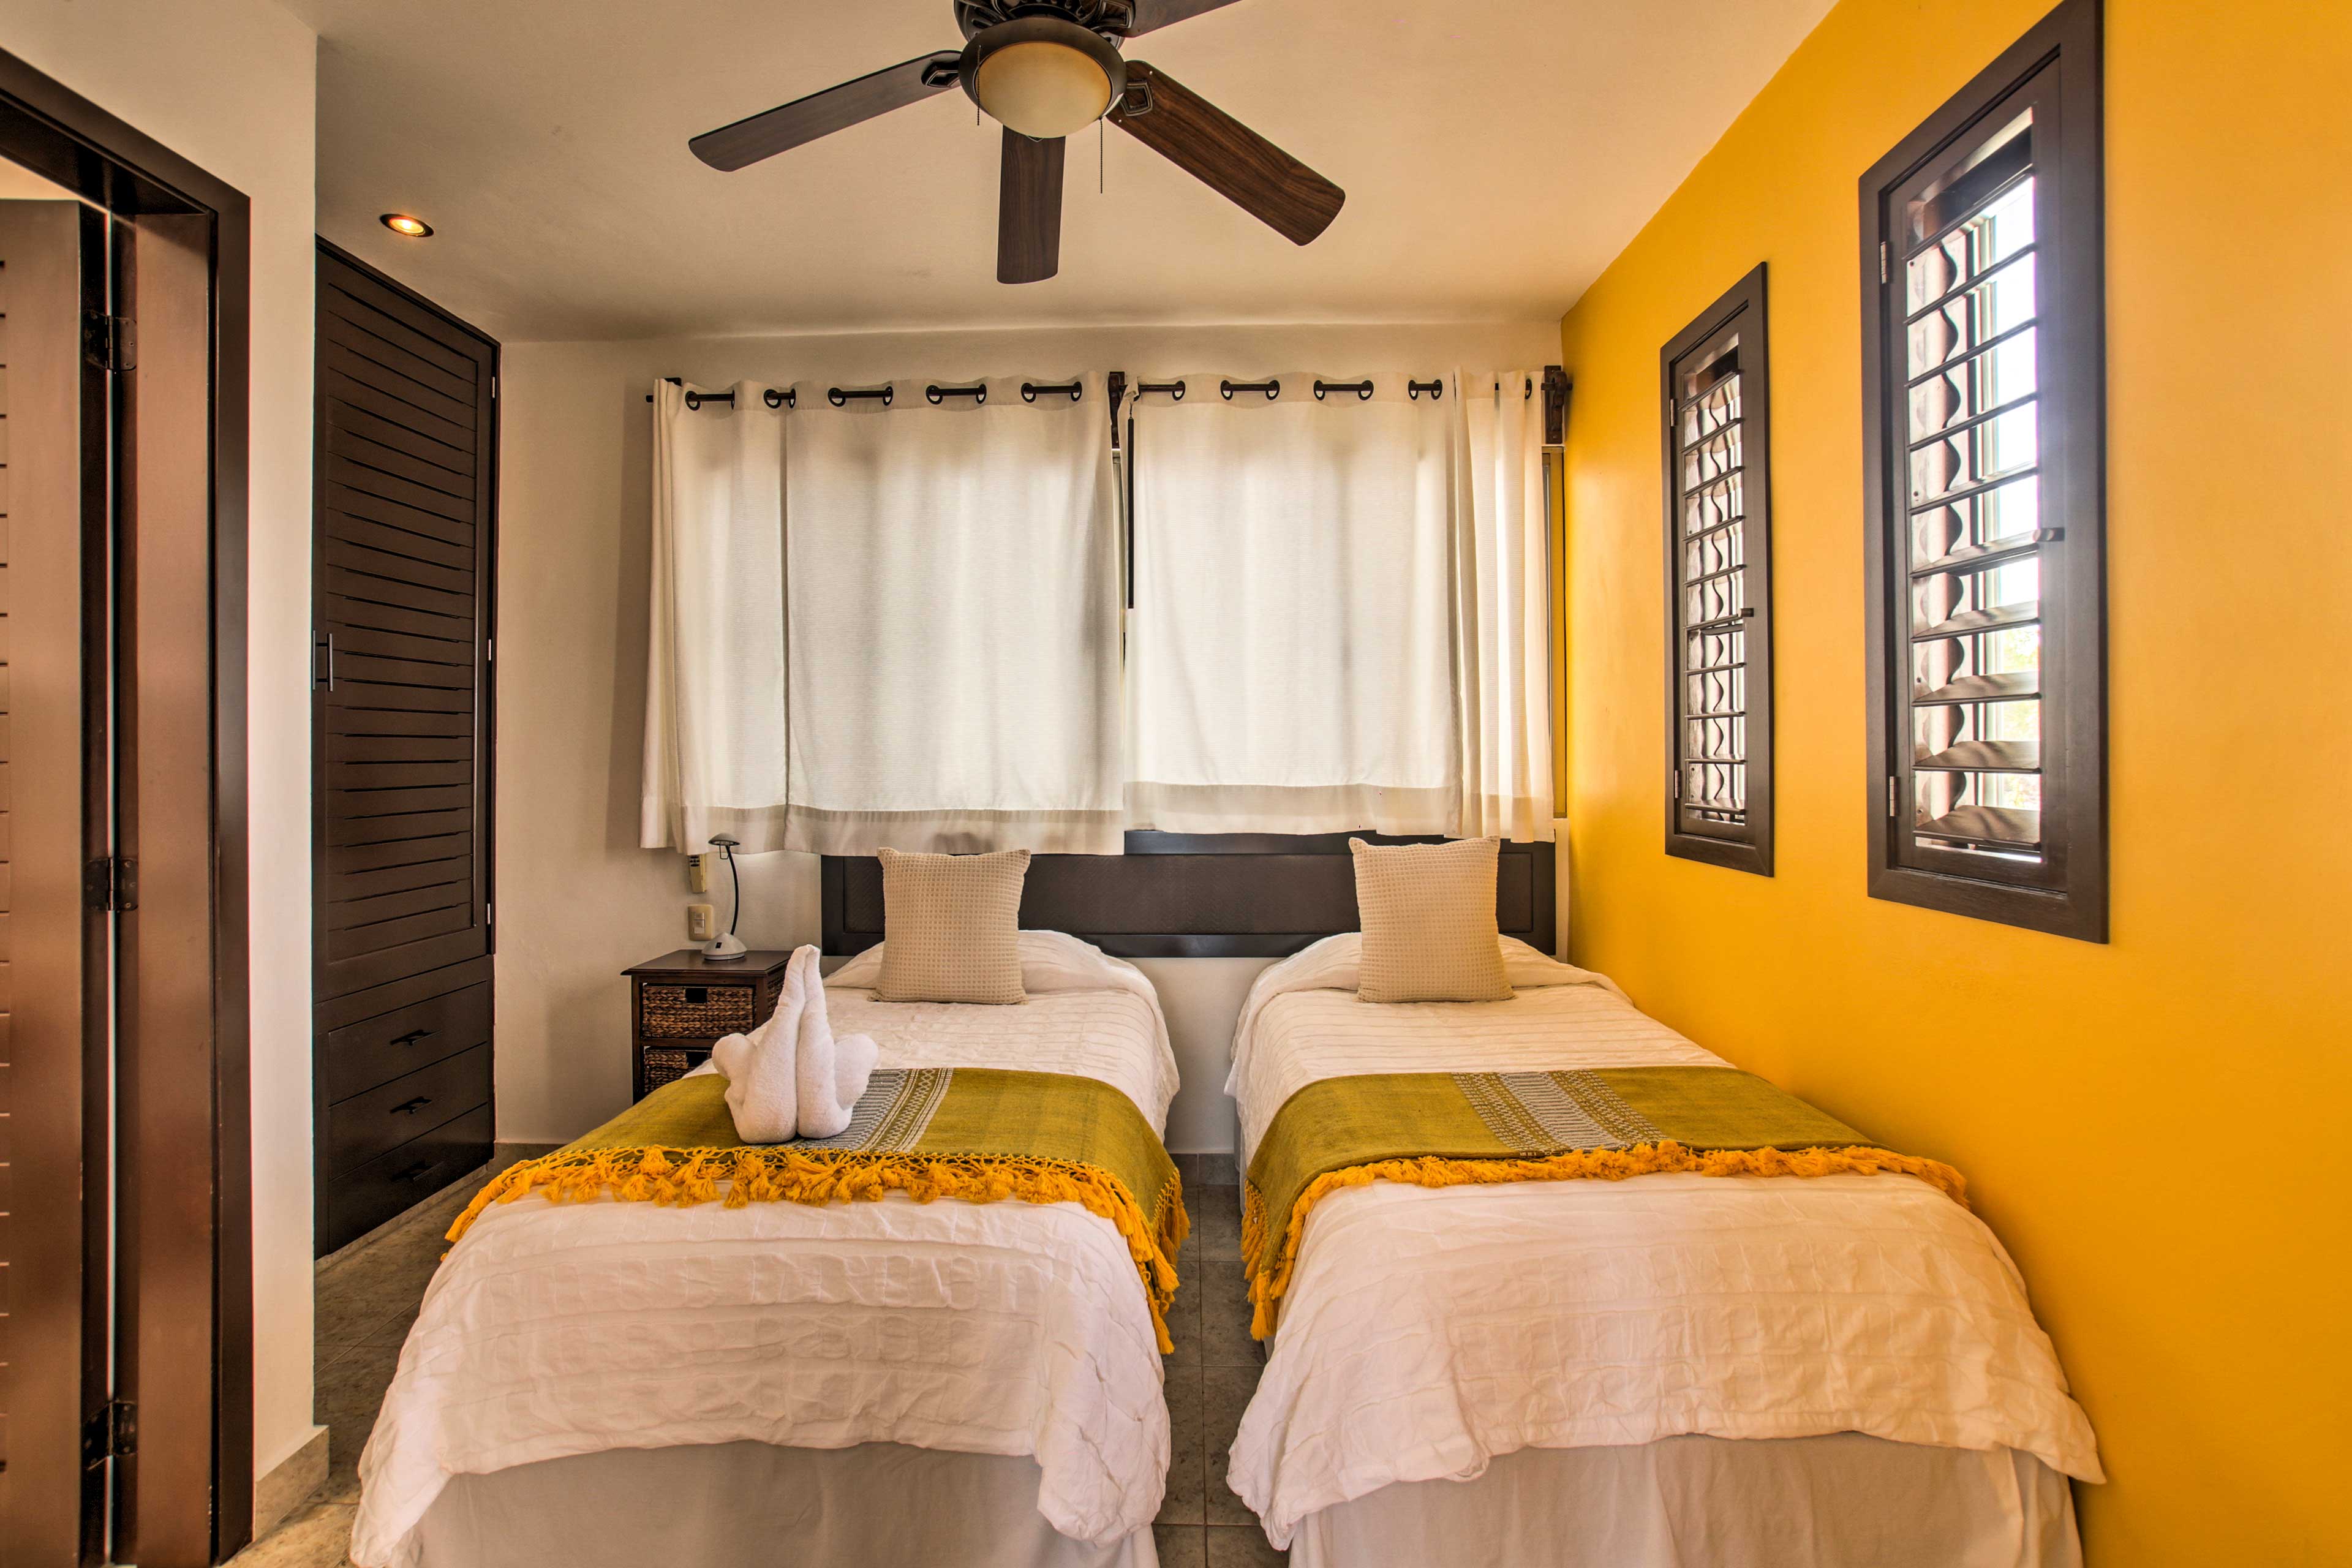 Main Villa | Bedroom 4 (Yellow Suite) | 2 Twin Beds (Can Convert to King Bed)